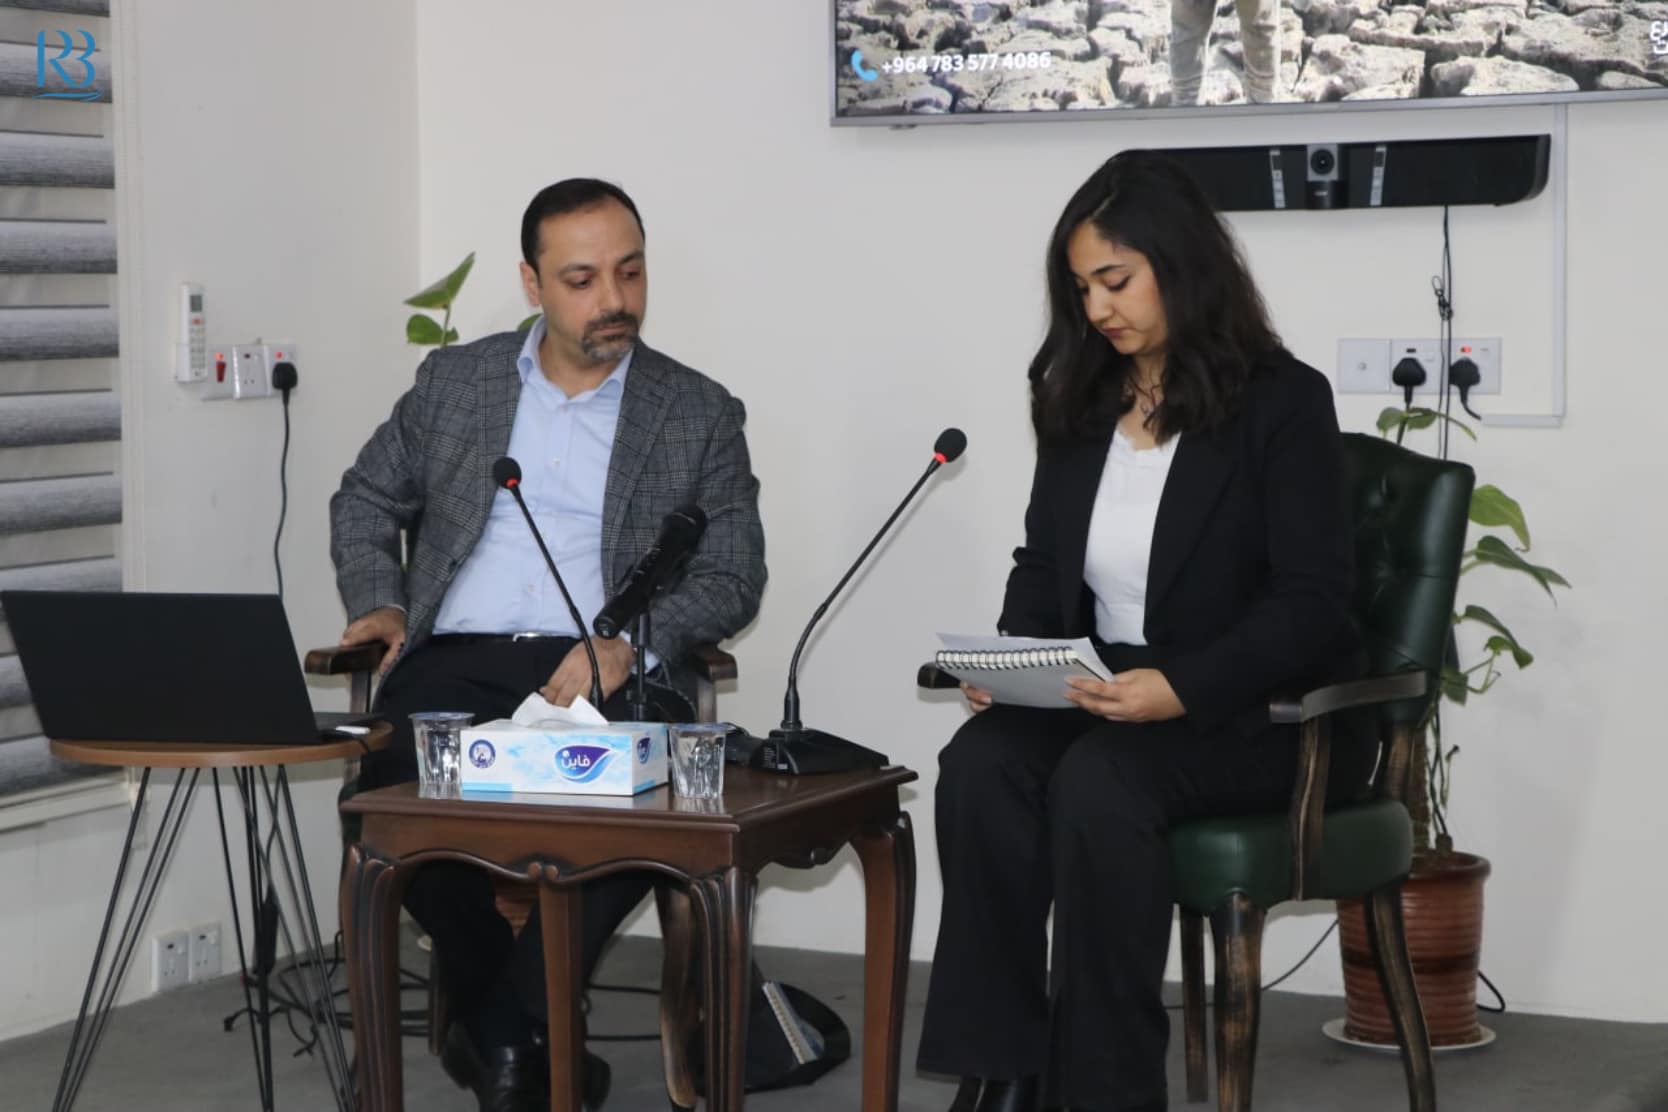 Climate changes and their impact on Iraq was the title of the dialogue symposium at the Riwaq Baghdad Center for Public Policy